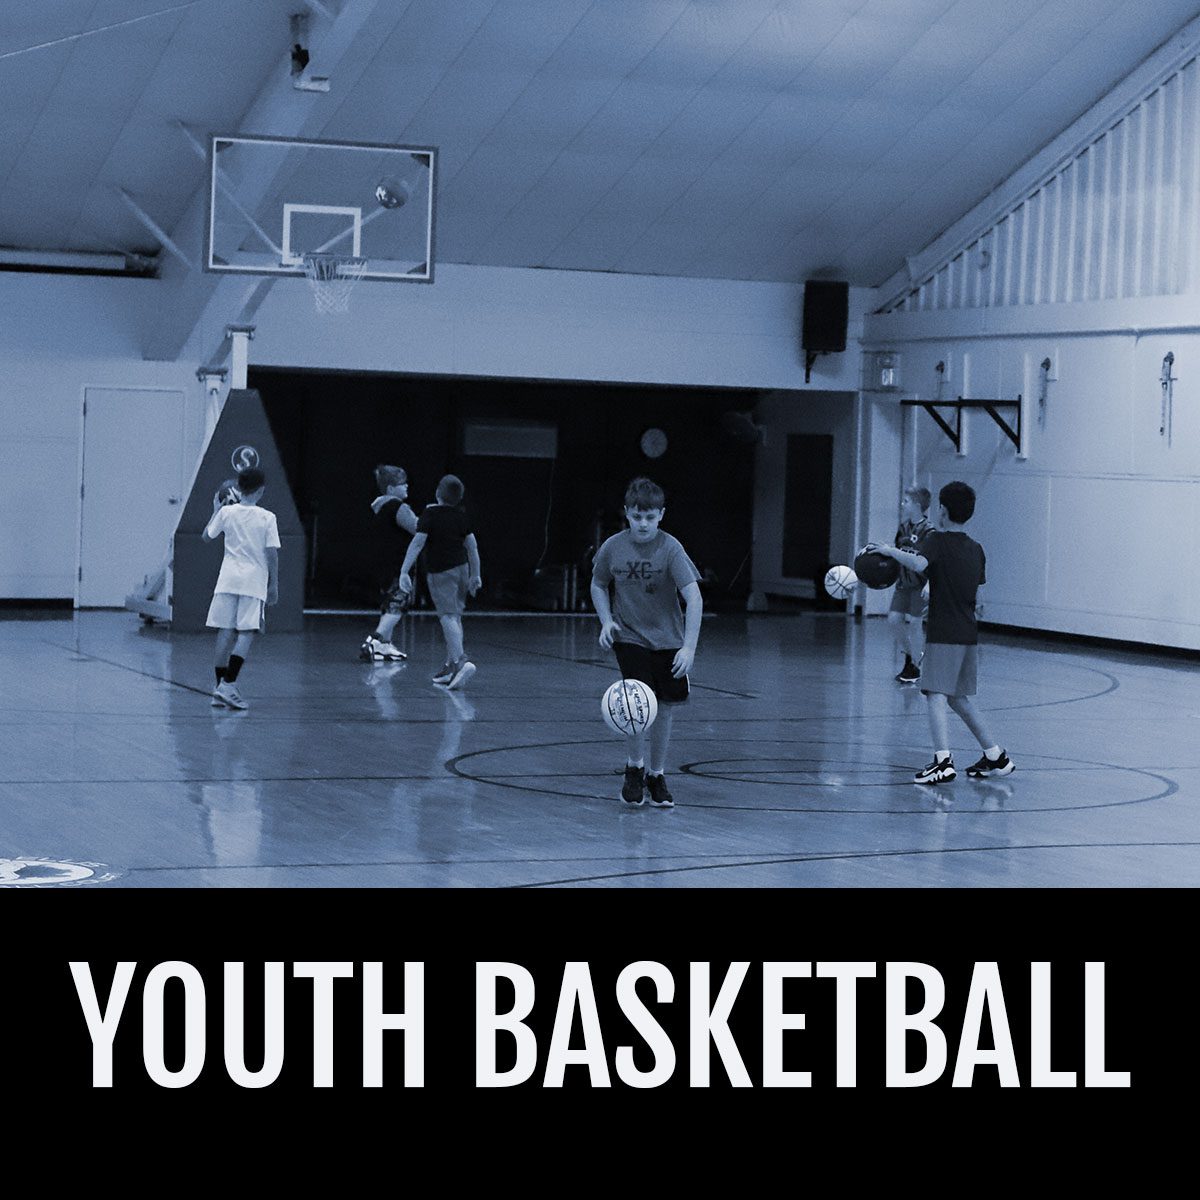 Youth basketball in Decatur